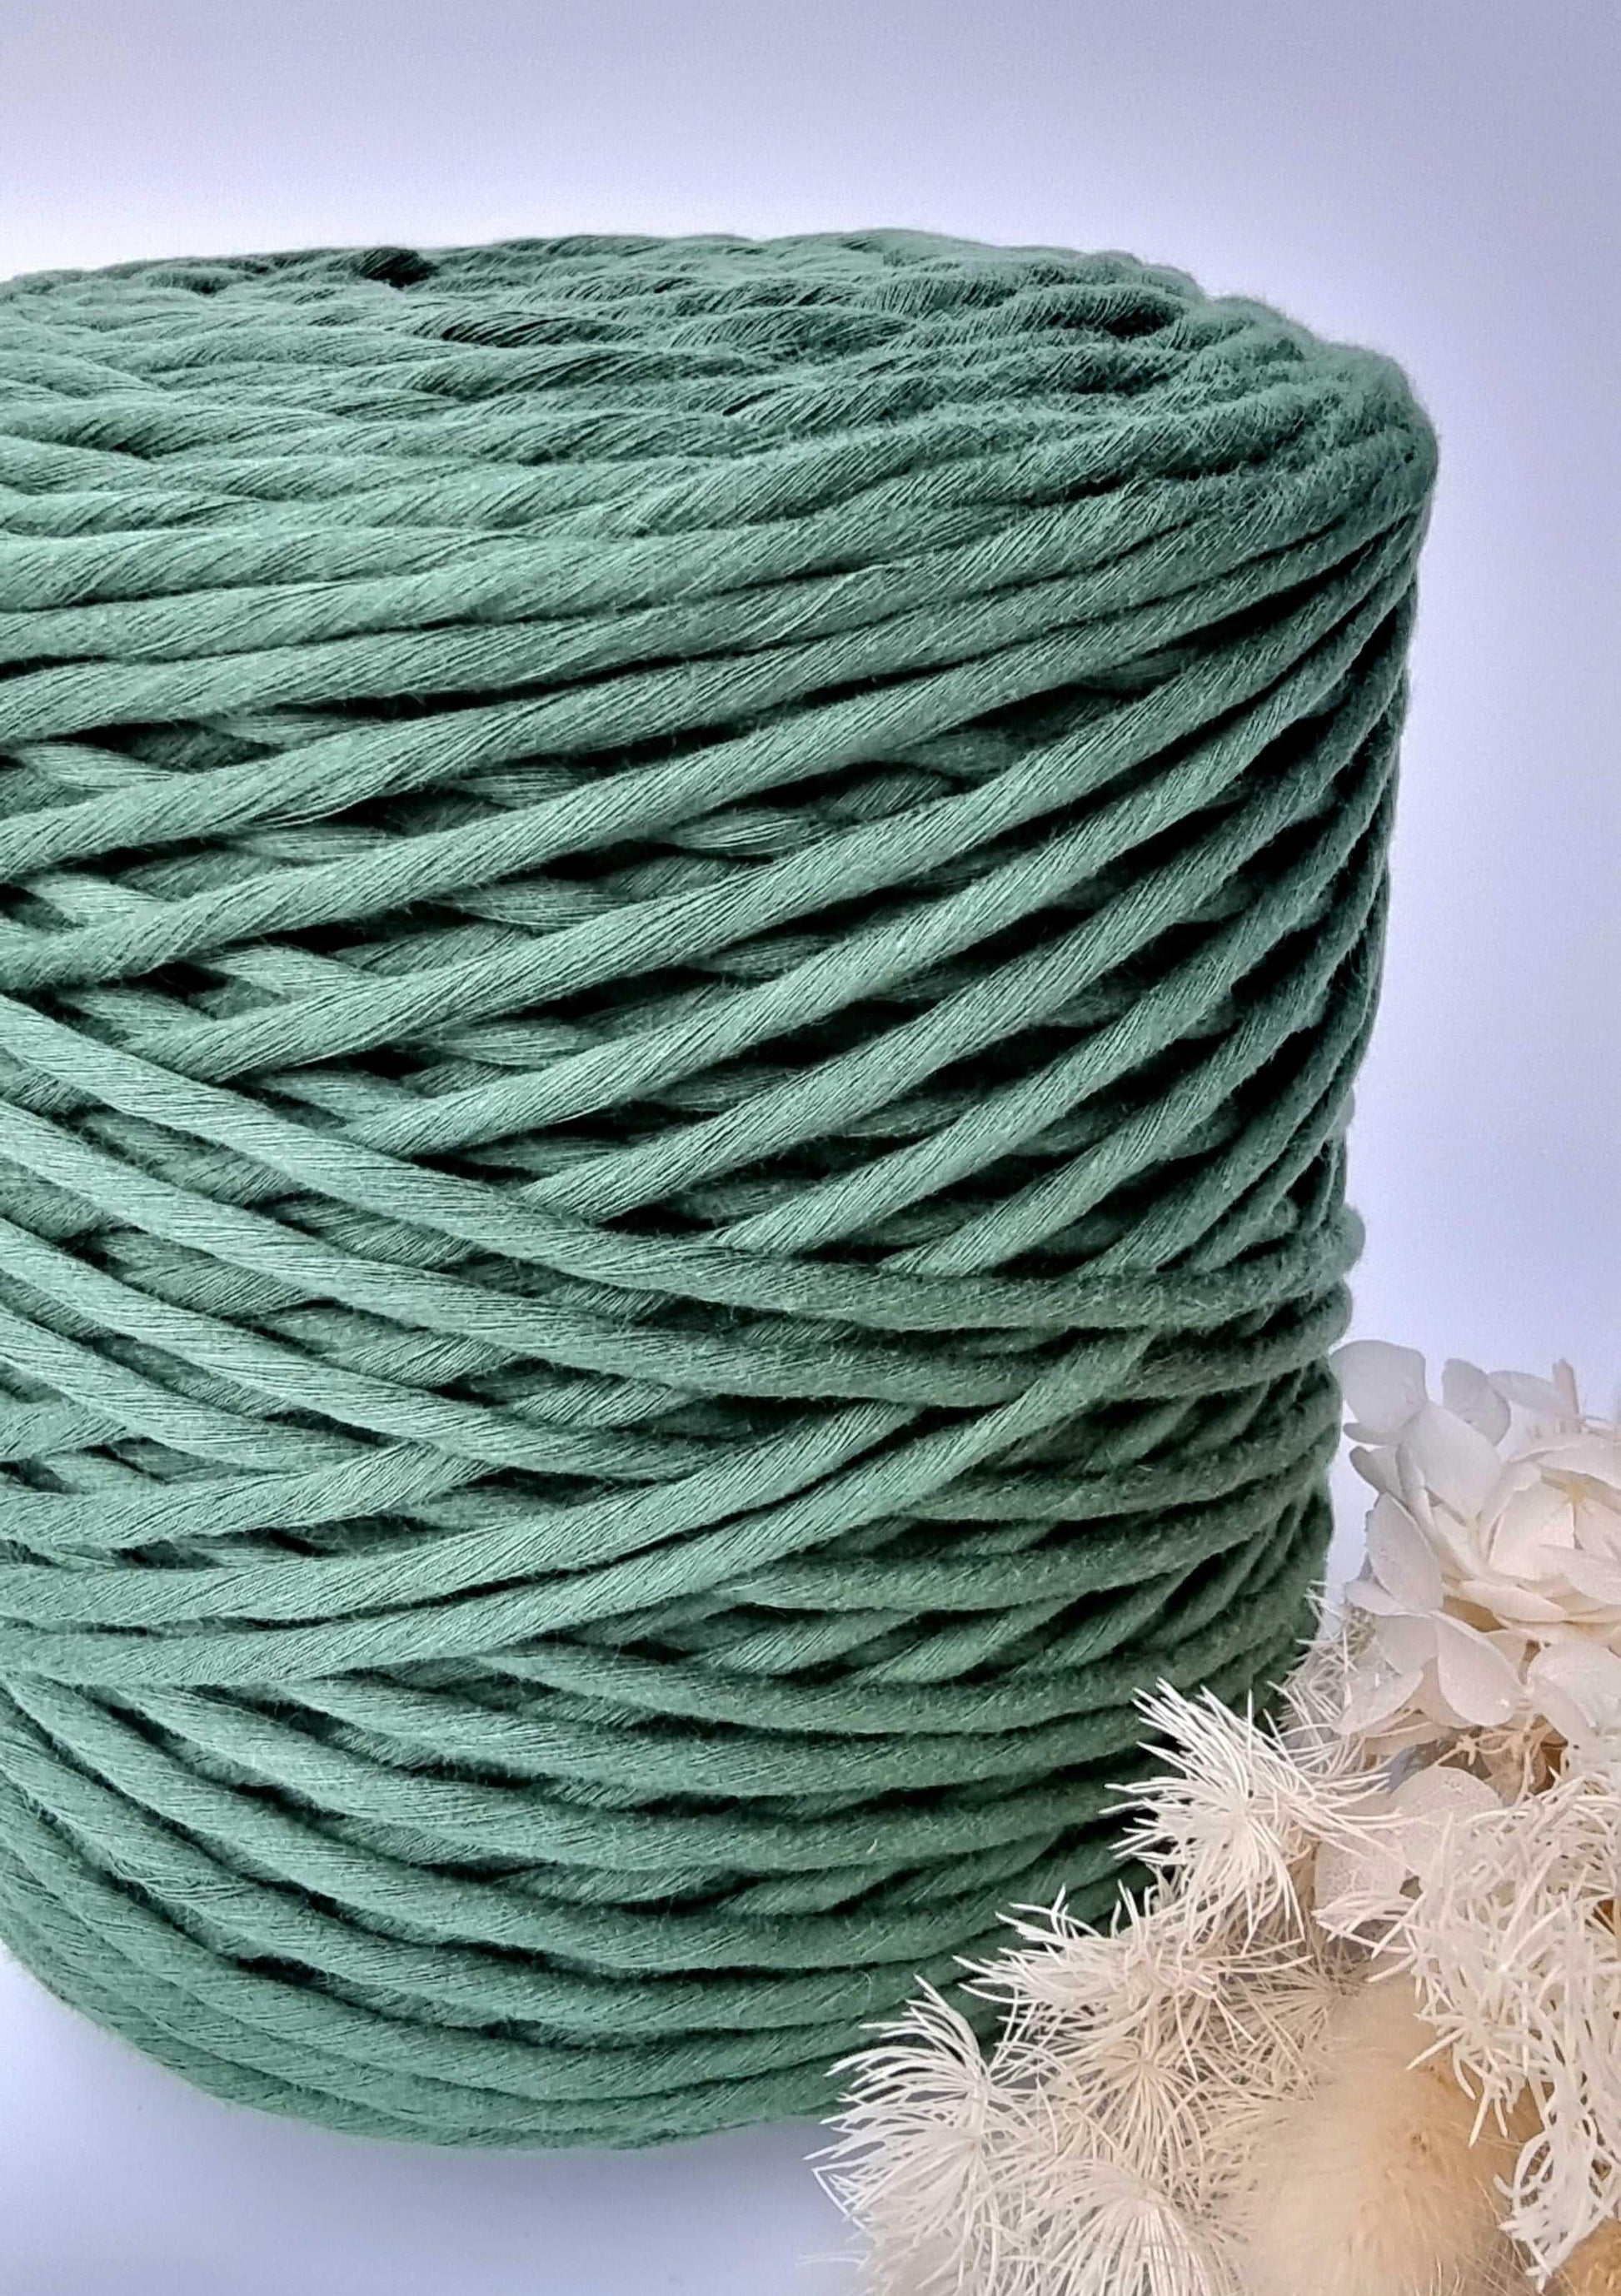 Emerald Green Macrame Cord - 3MM  Single Strand Luxe Cotton String 1KG Stardust Melbourne